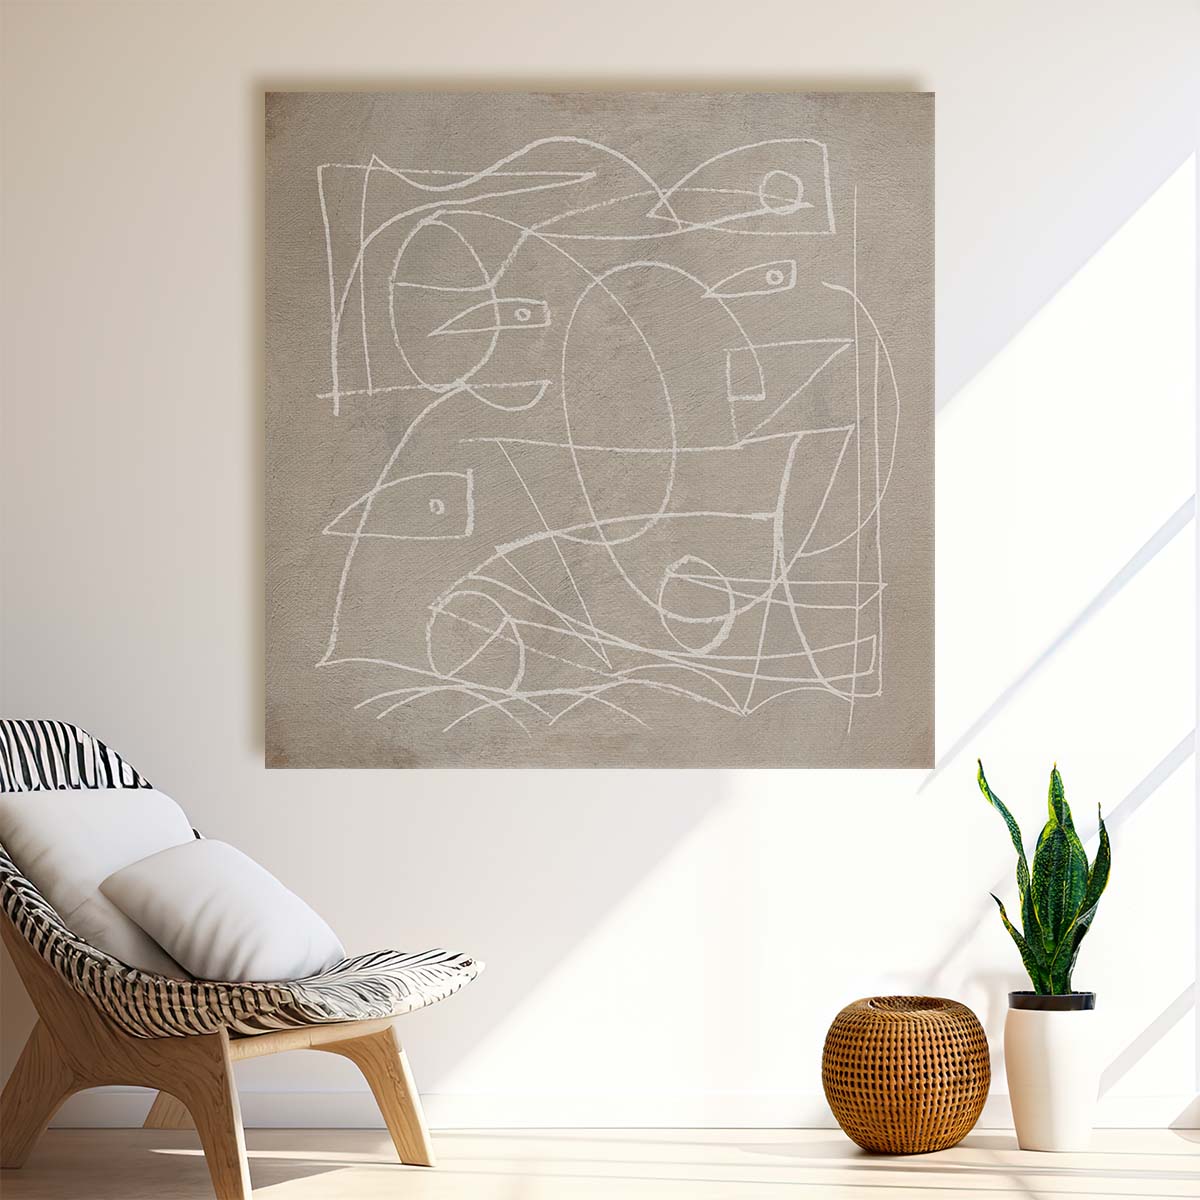 Modern Minimalist Abstract Acrylic Illustration by Dan Hobday Wall Art by Luxuriance Designs. Made in USA.